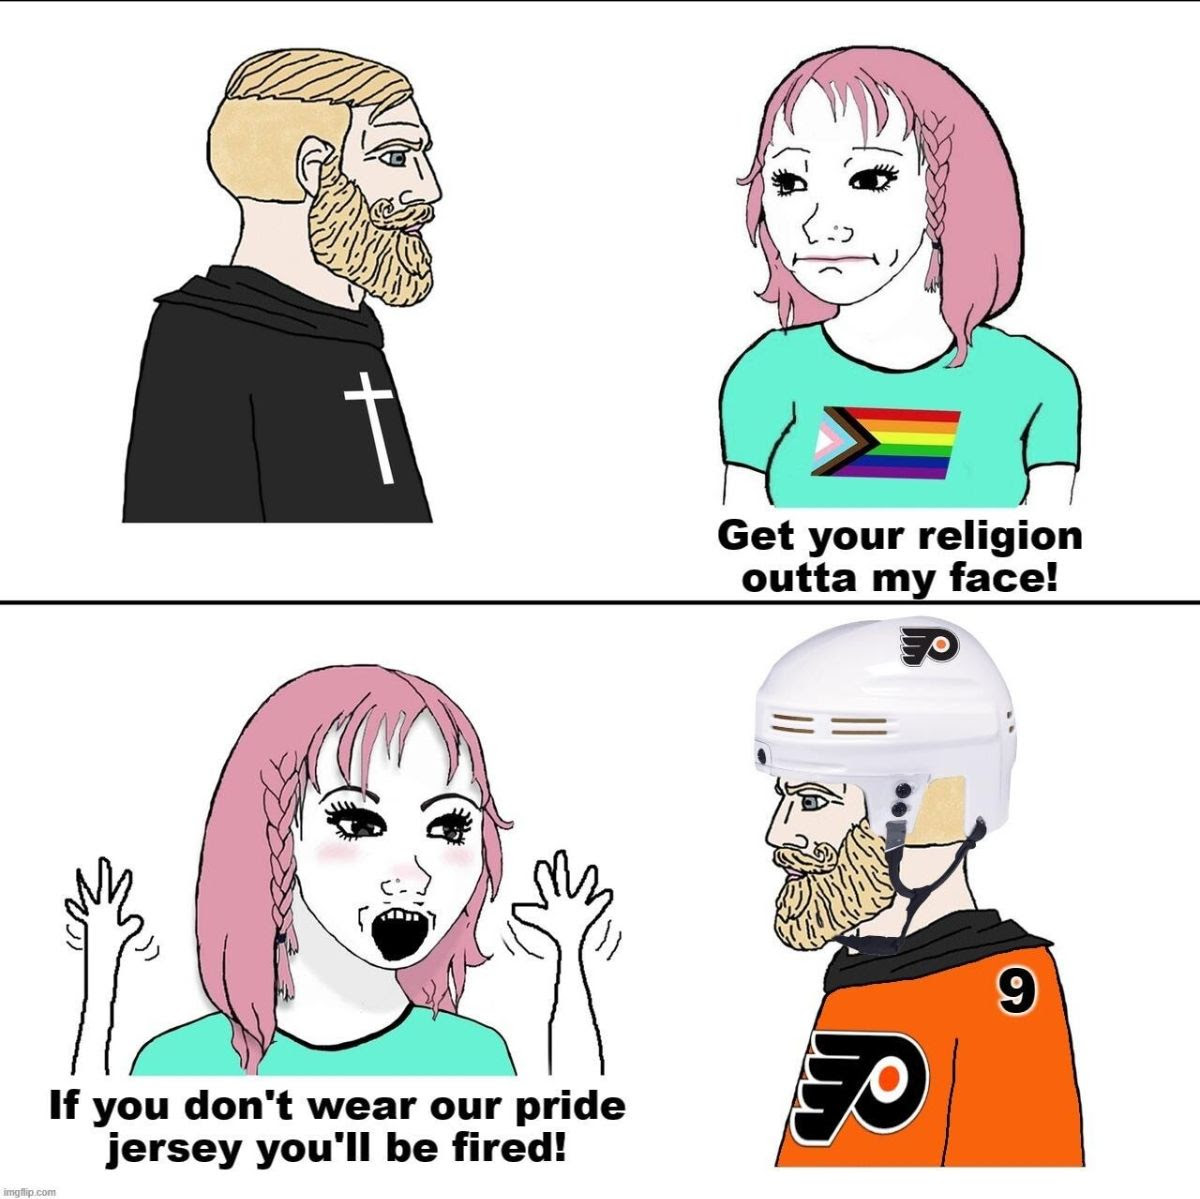 Meme indicating the hypocrisy of some individuals who hate religion but make "pride" a religion.